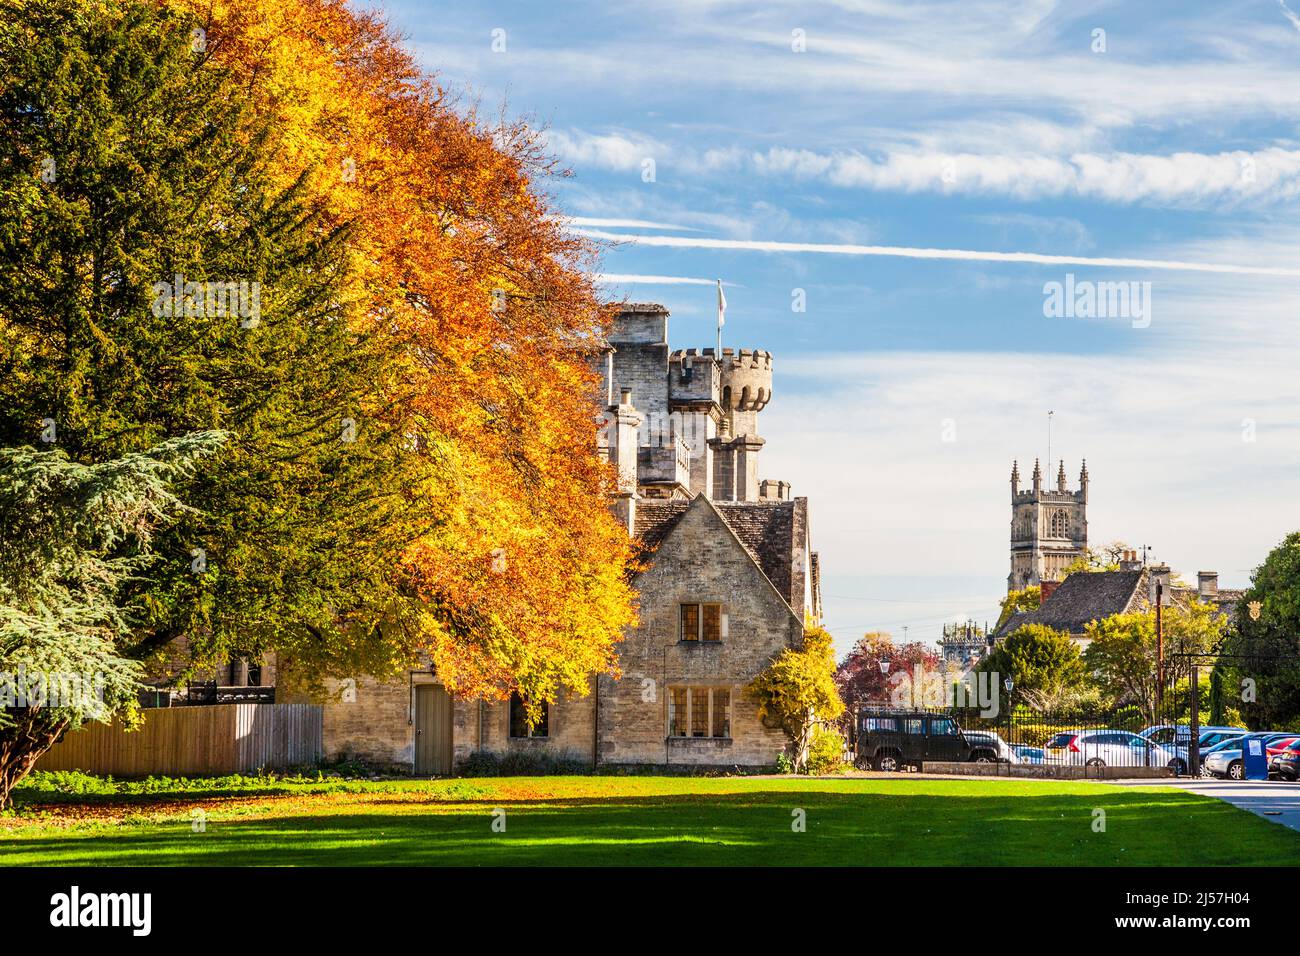 Beautiful autumn colours at Cirencester Park on the Bathhurst Estate in Gloucestershire.  The tower of the Church of John the Baptist and part of the Stock Photo